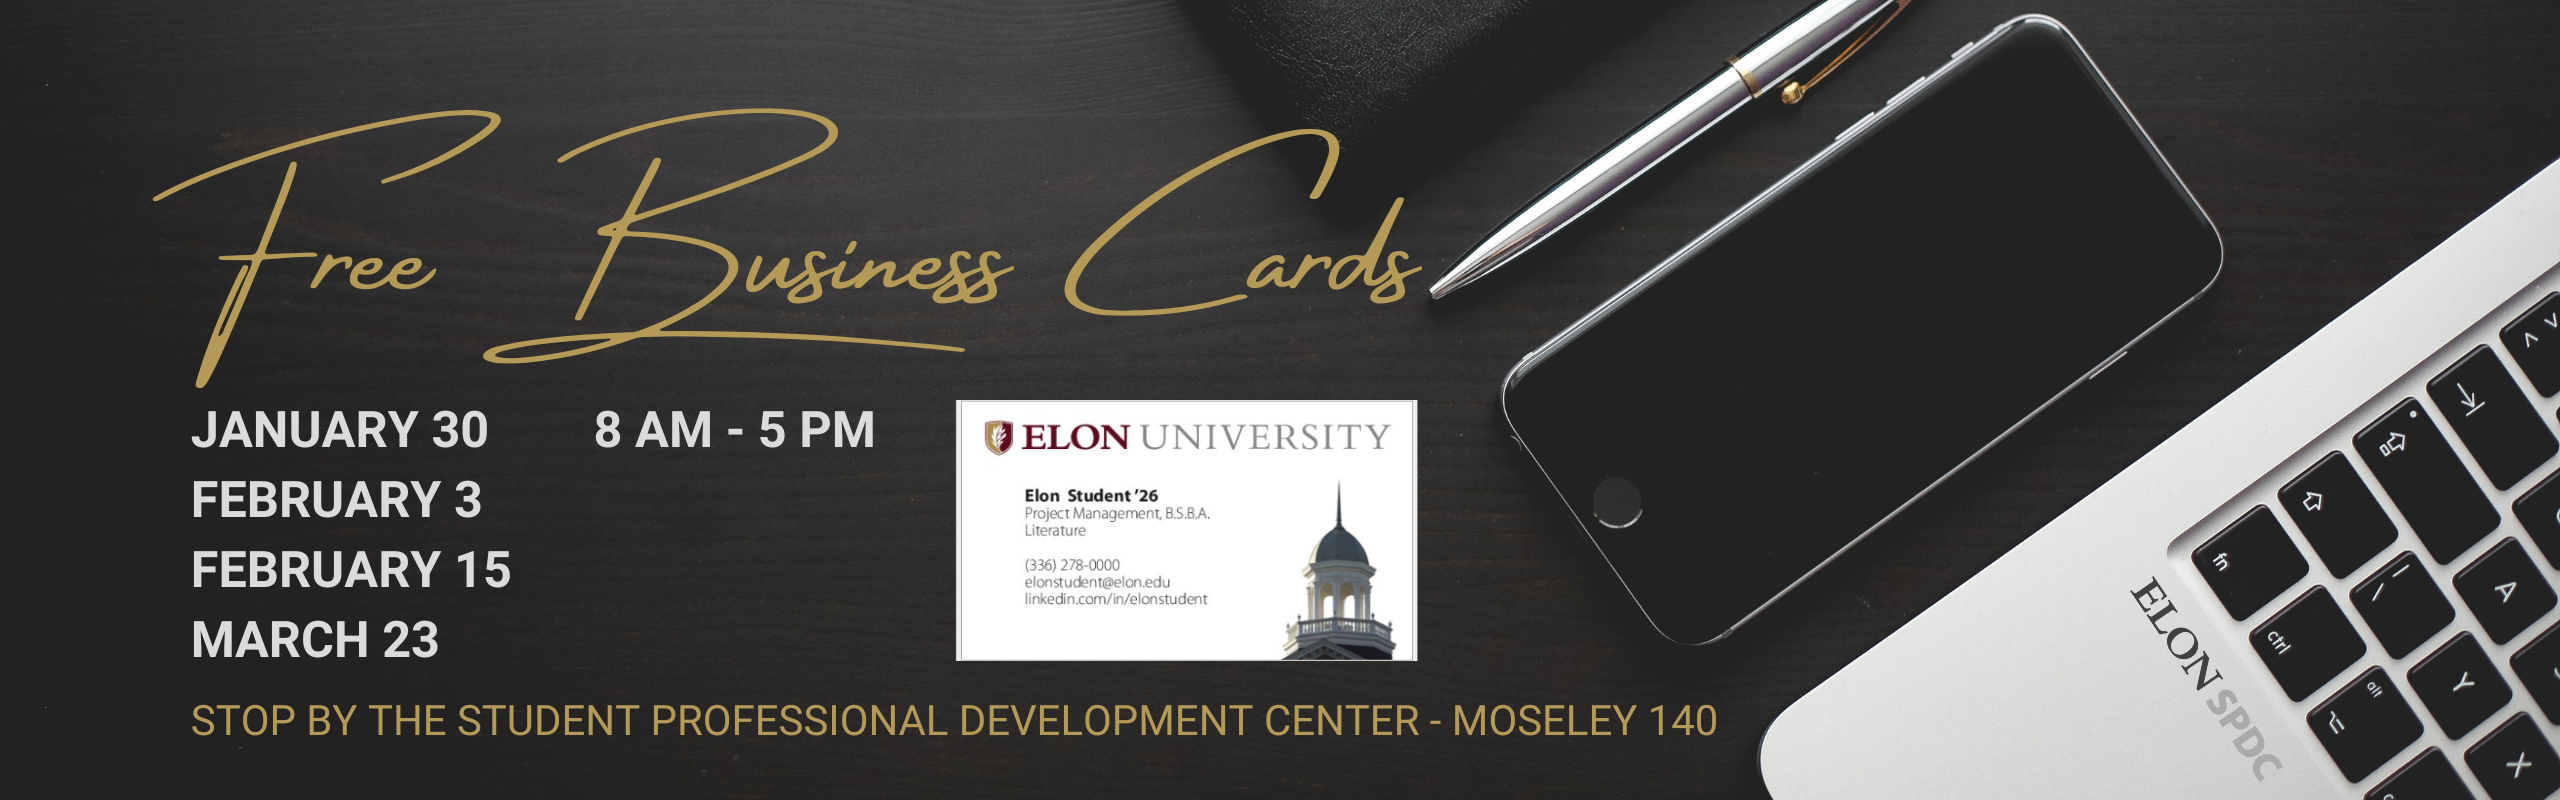 Free Business Cards Offered throughout the semester. Check the Elon Job Network for dates and details